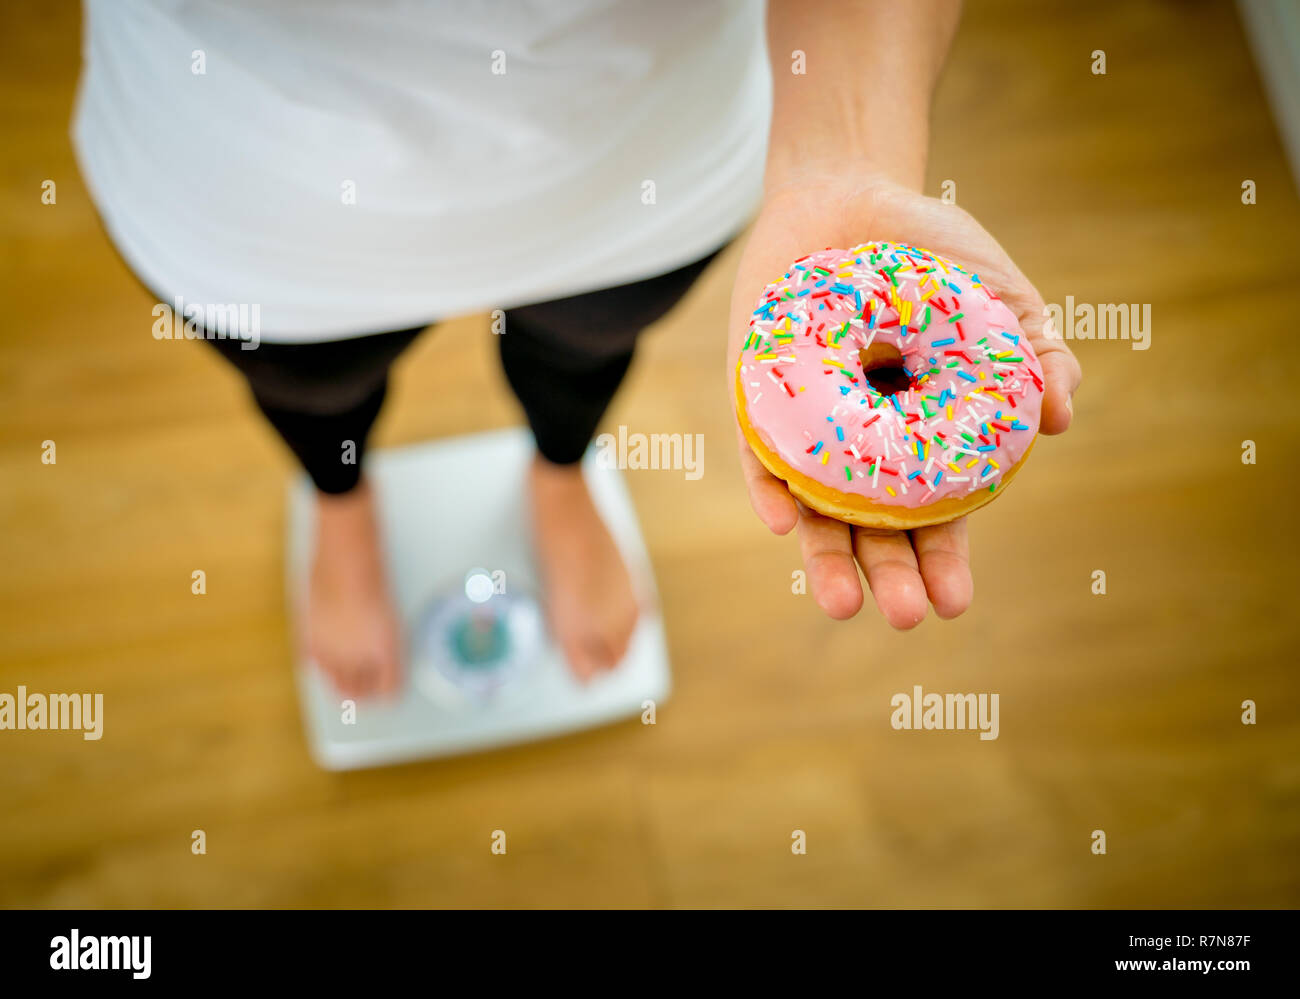 Close up of woman on scale holding on hands apple and doughnut making choice between healthy unhealthy food dessert while measuring body weight in Nut Stock Photo